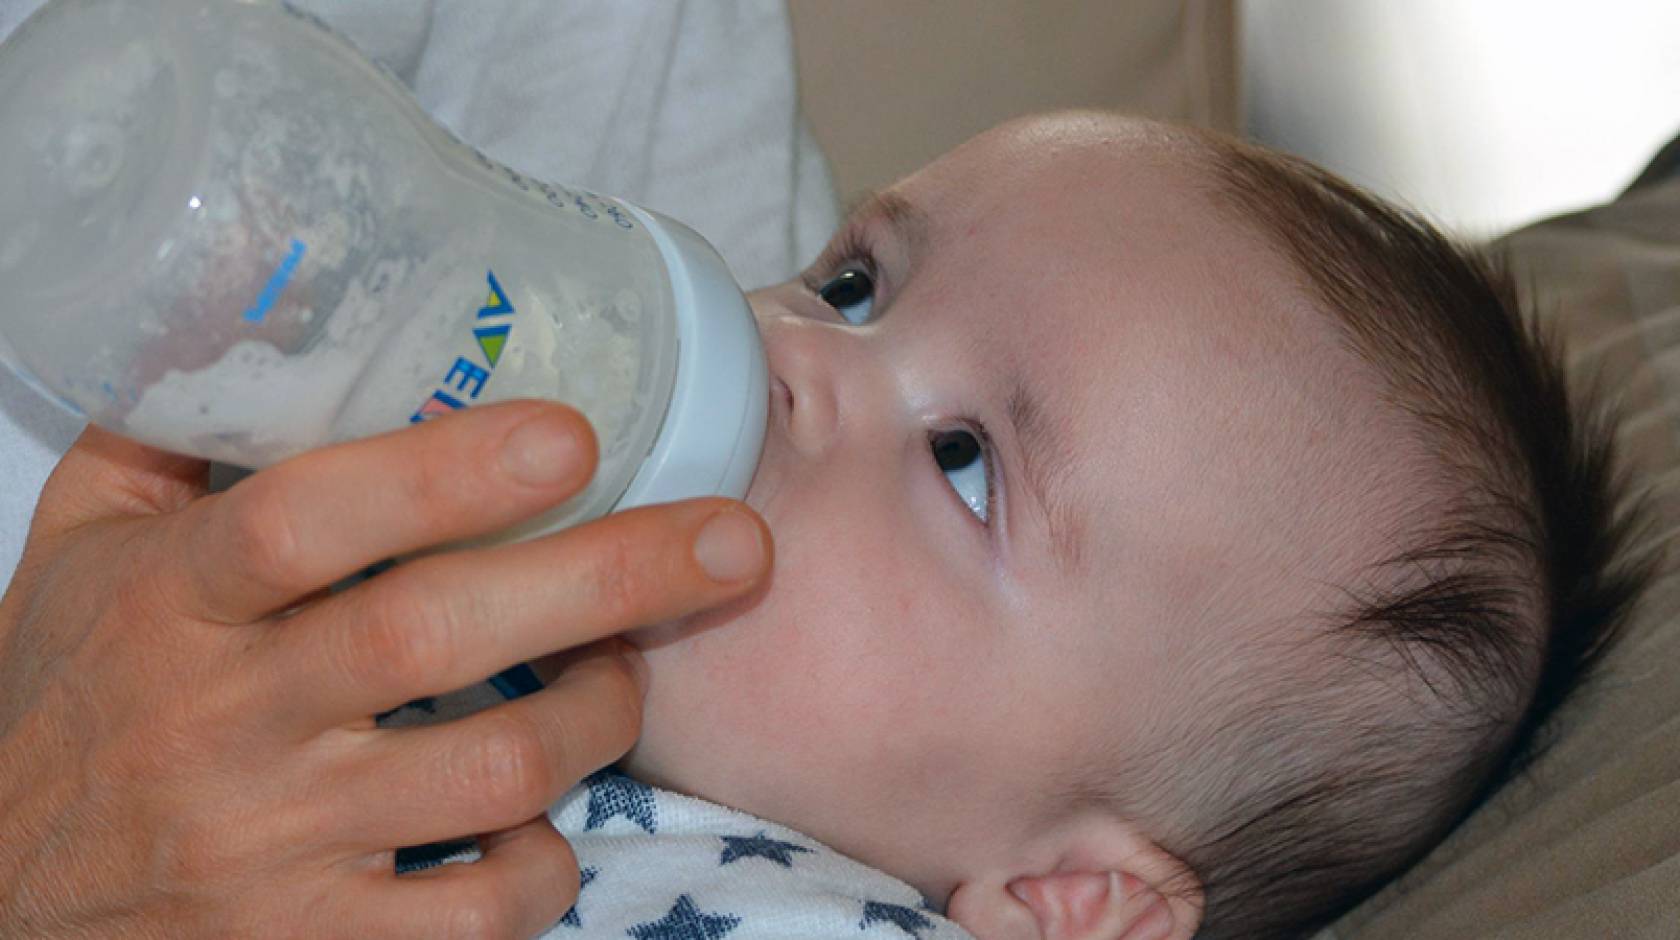 Baby drinking from a bottle looking up at person feeding